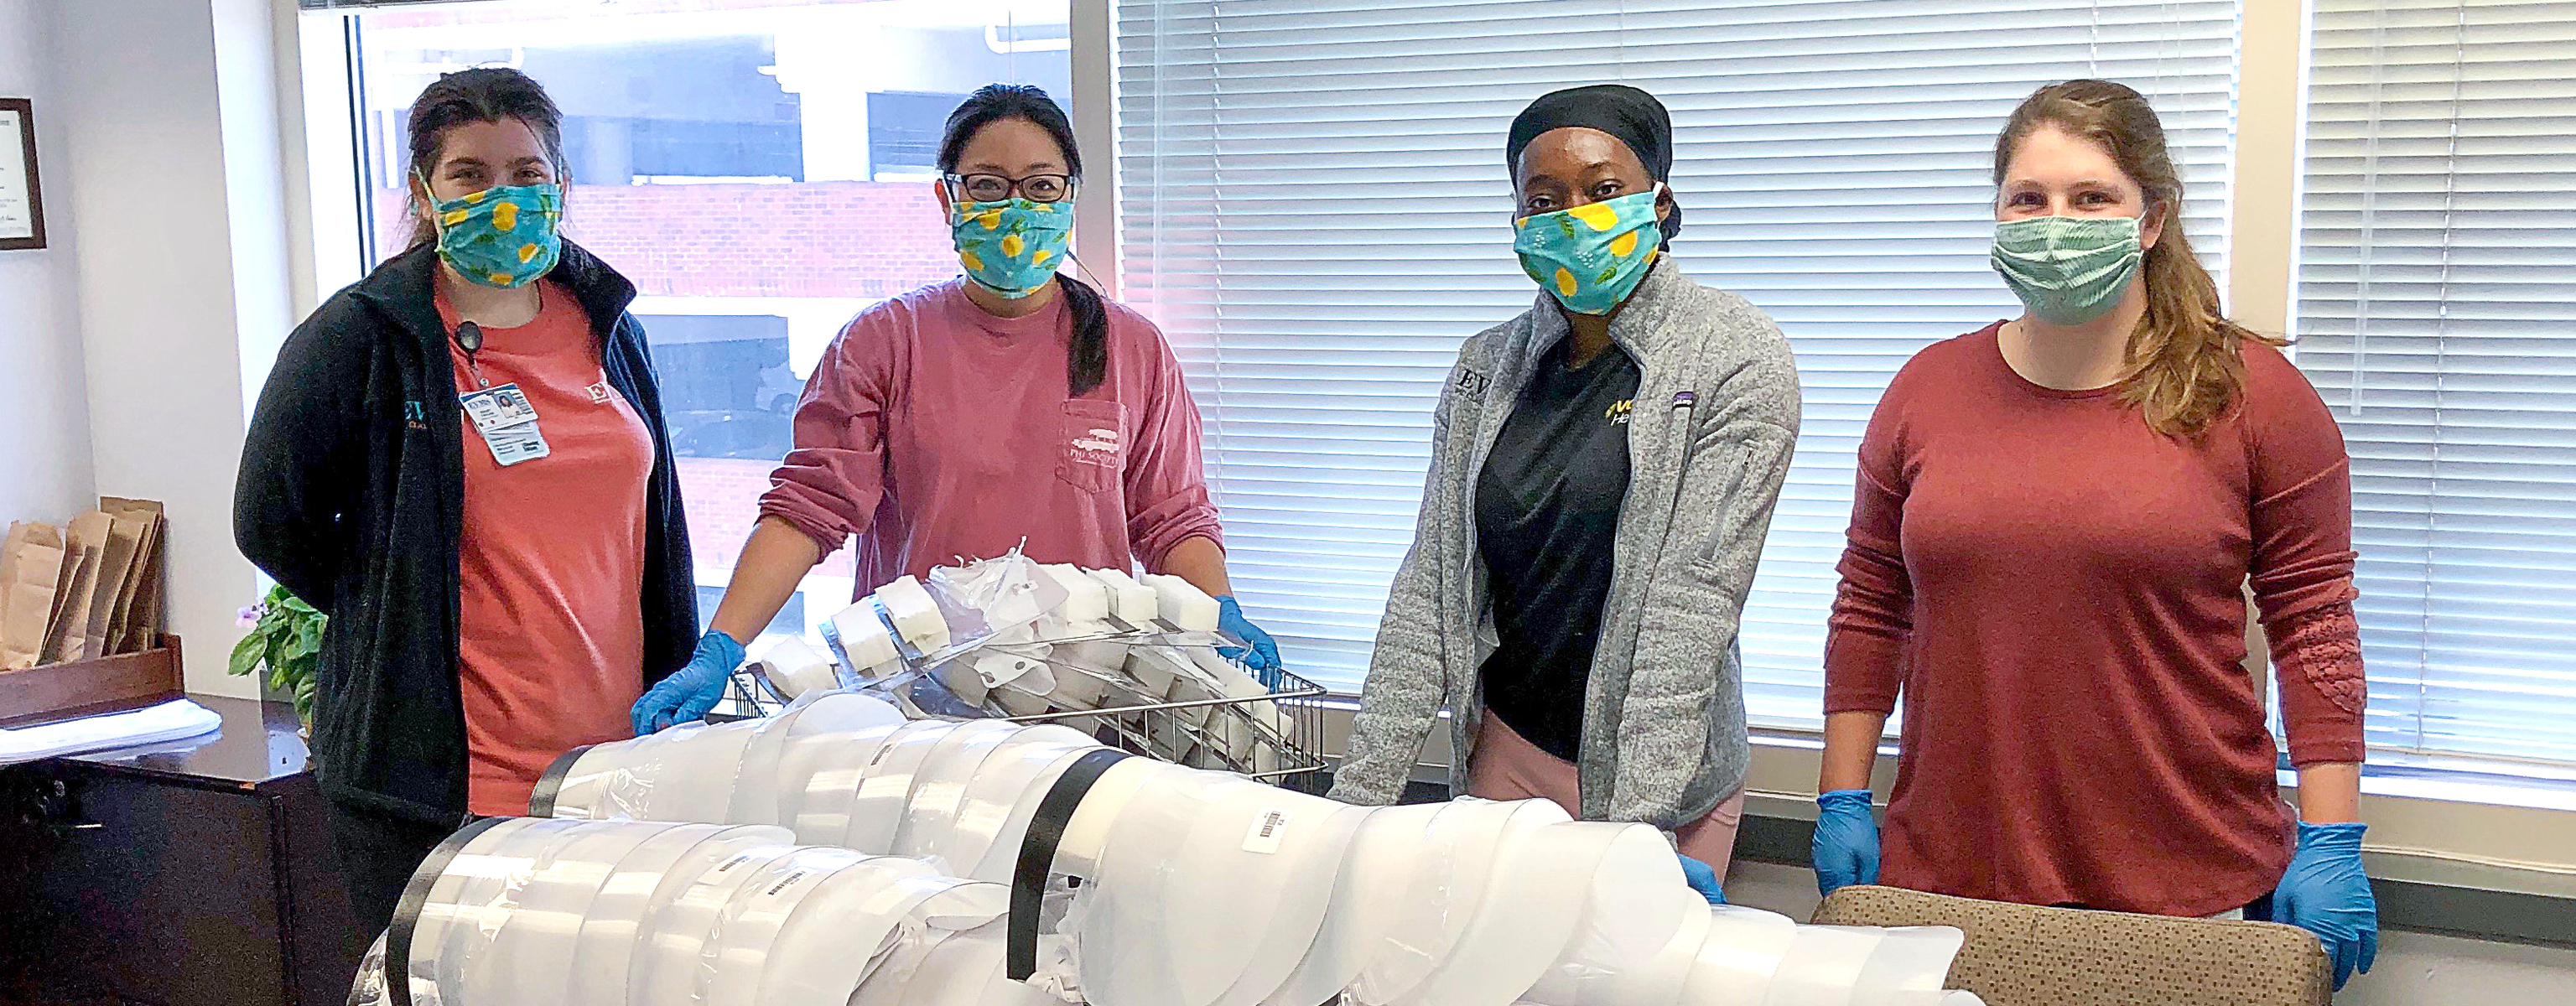 Four young women stand behind a desk covered in assembled face shields and face shield parts.